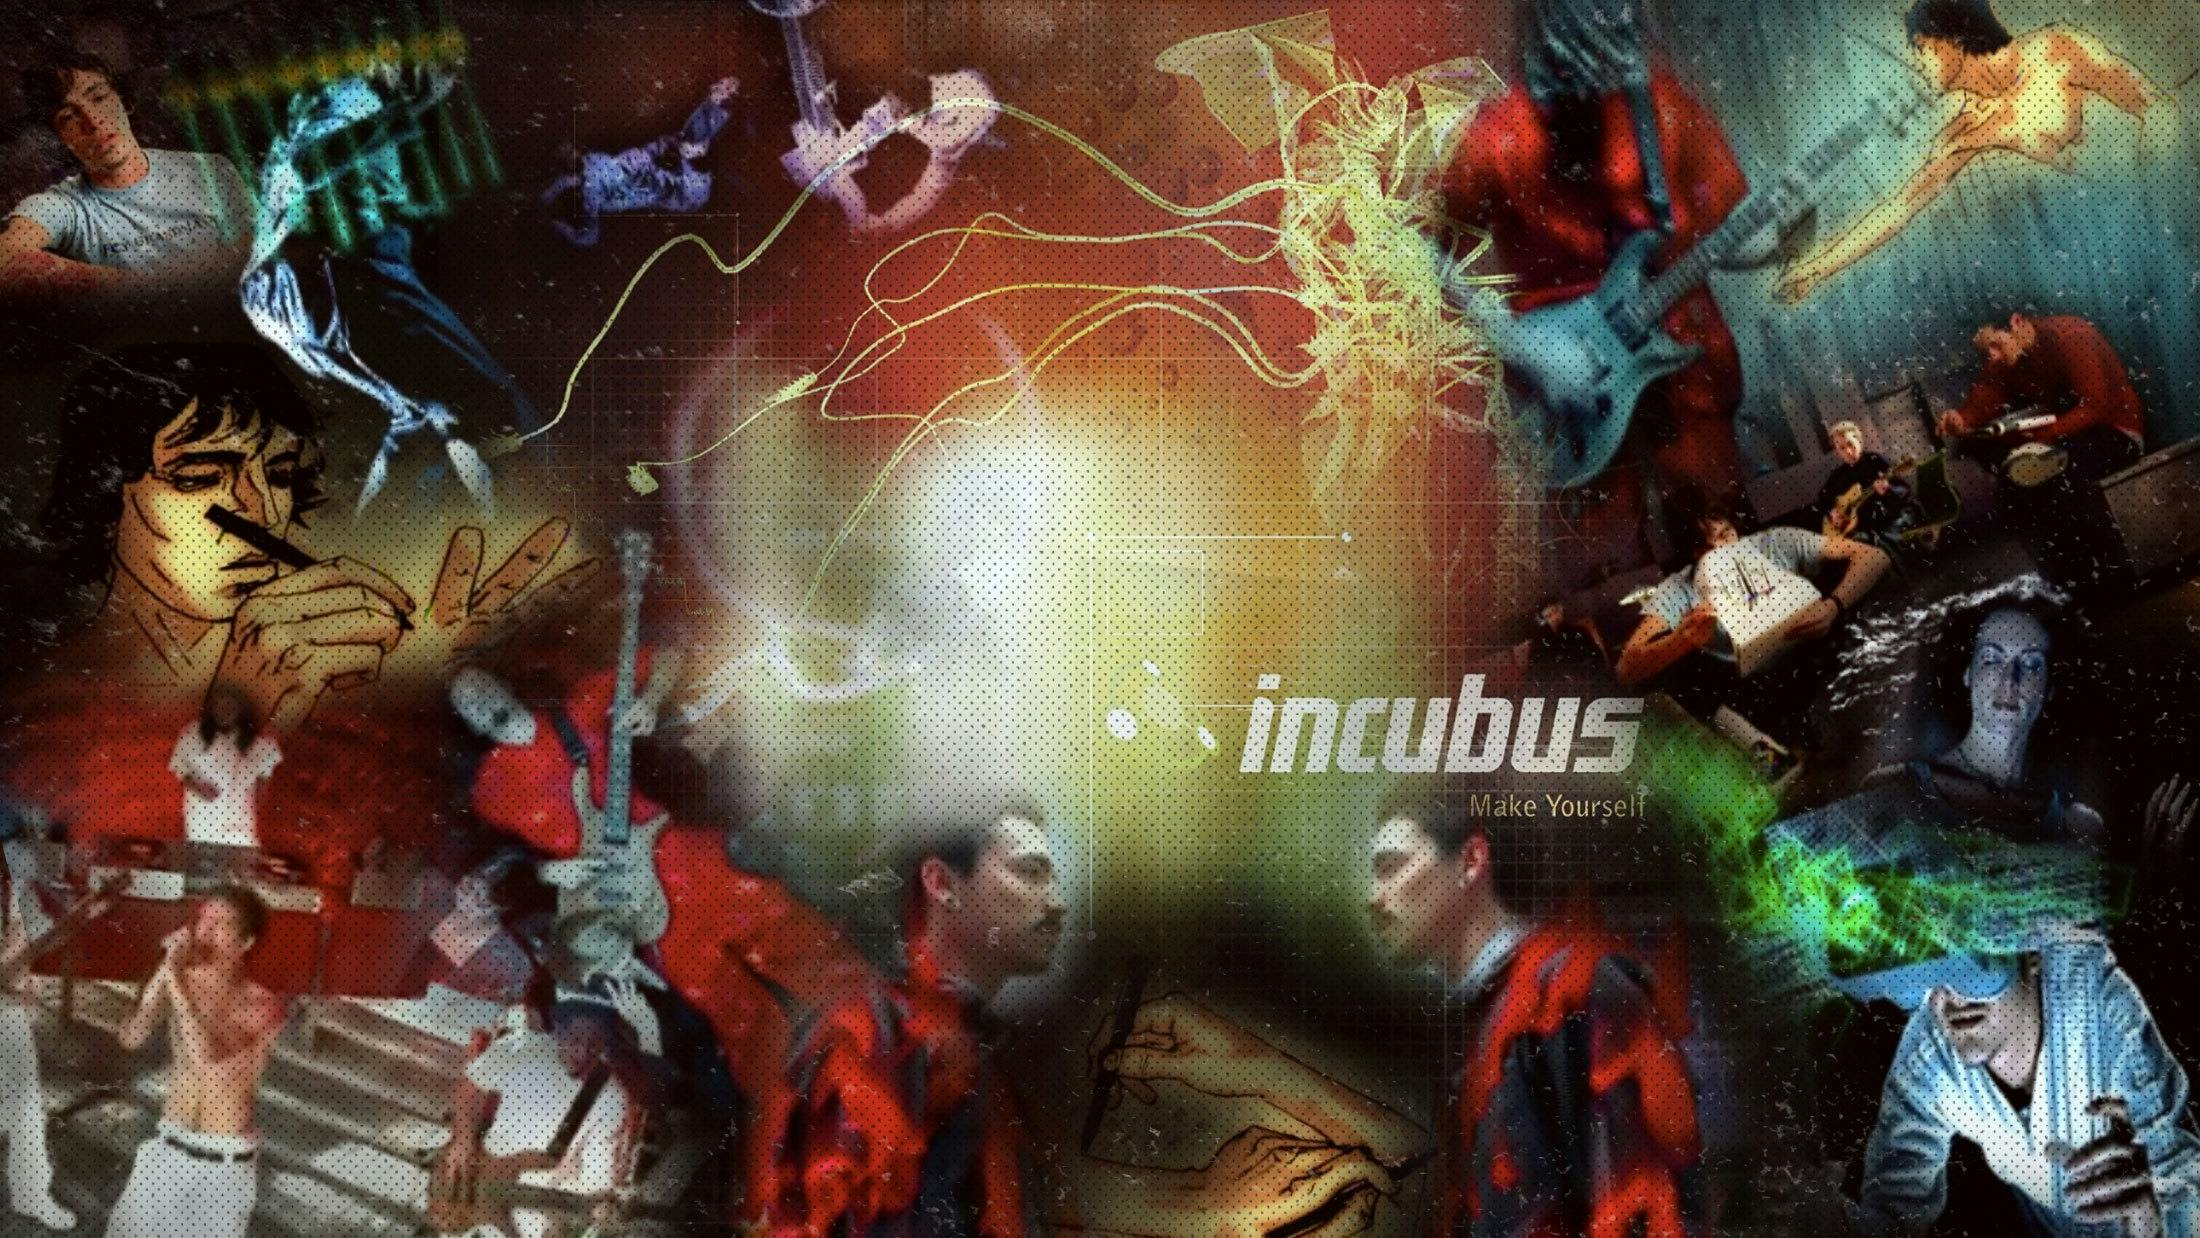 "Instead Of Falling Into Some Subgenre Of Rock, We Created Our Own": An Oral History Of Incubus' Make Yourself